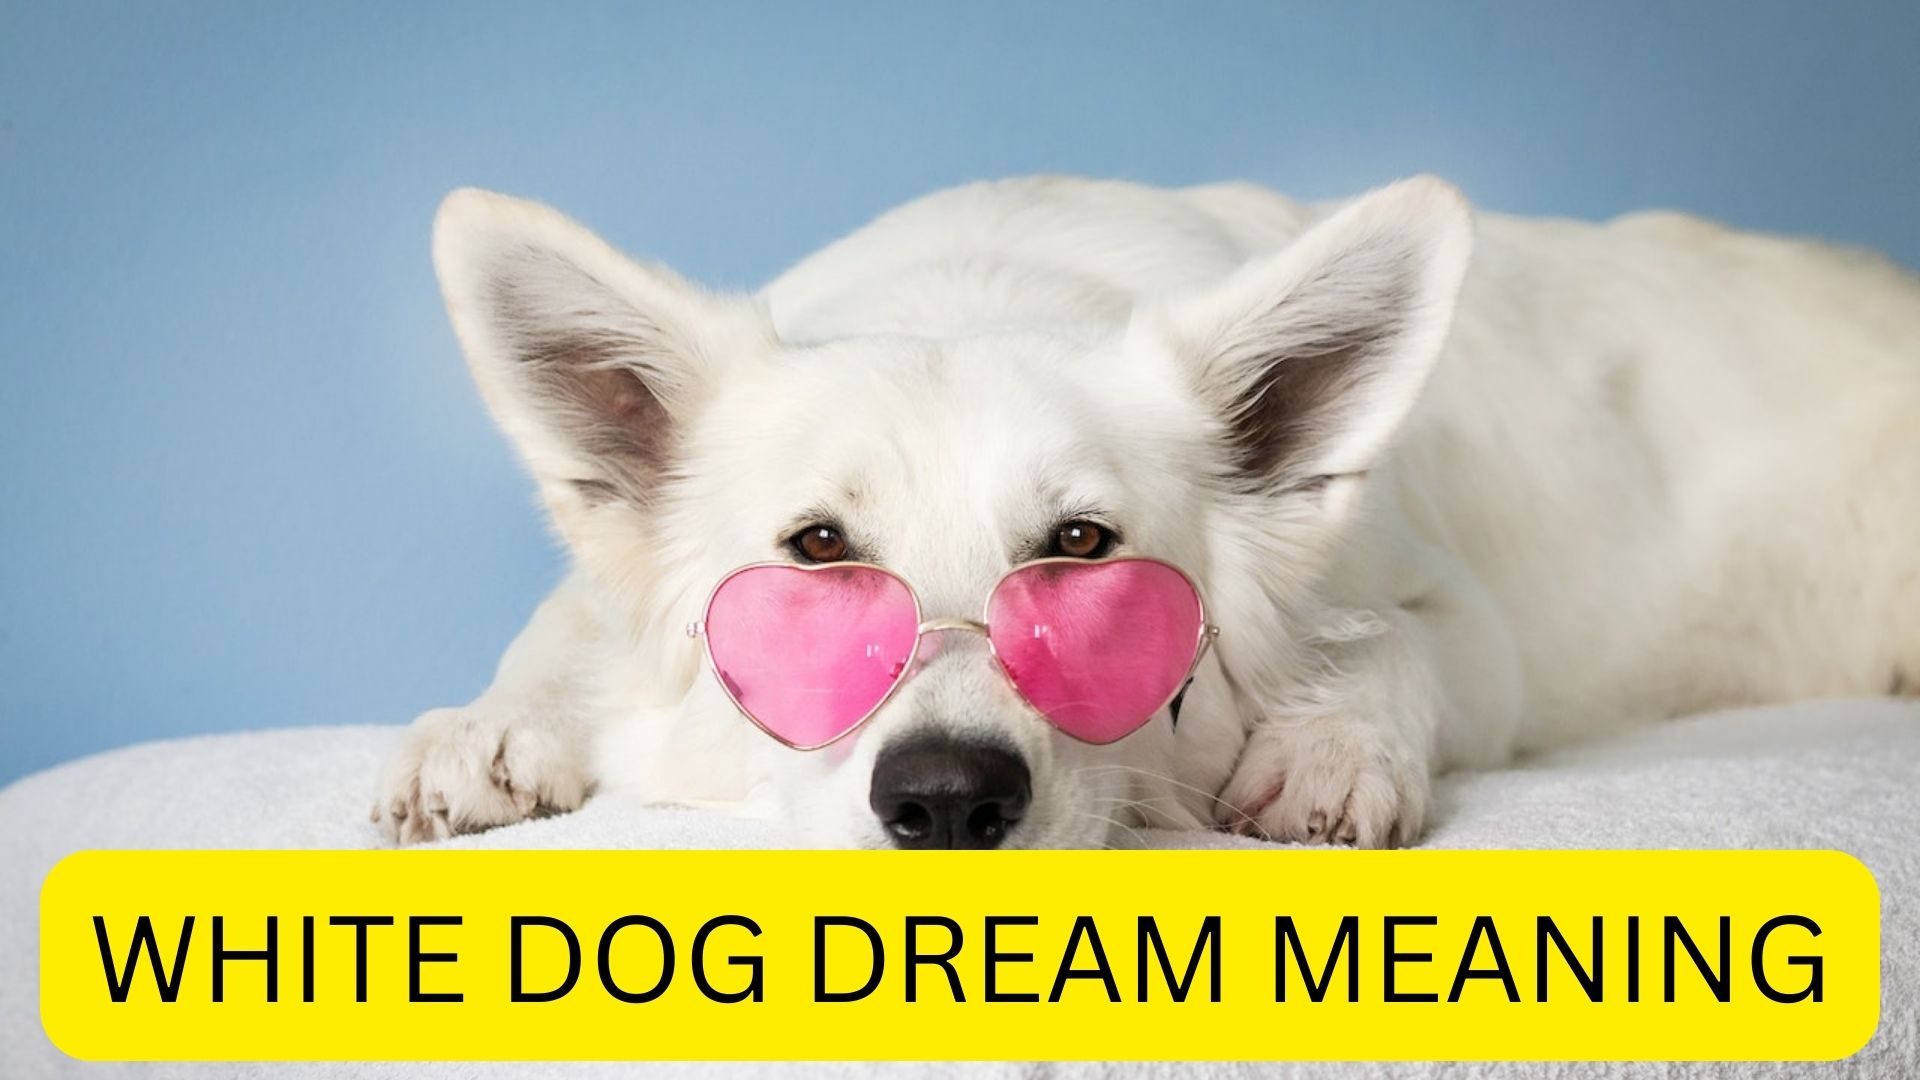 White Dog Dream Meaning - A Symbol Of Friendship And Happiness